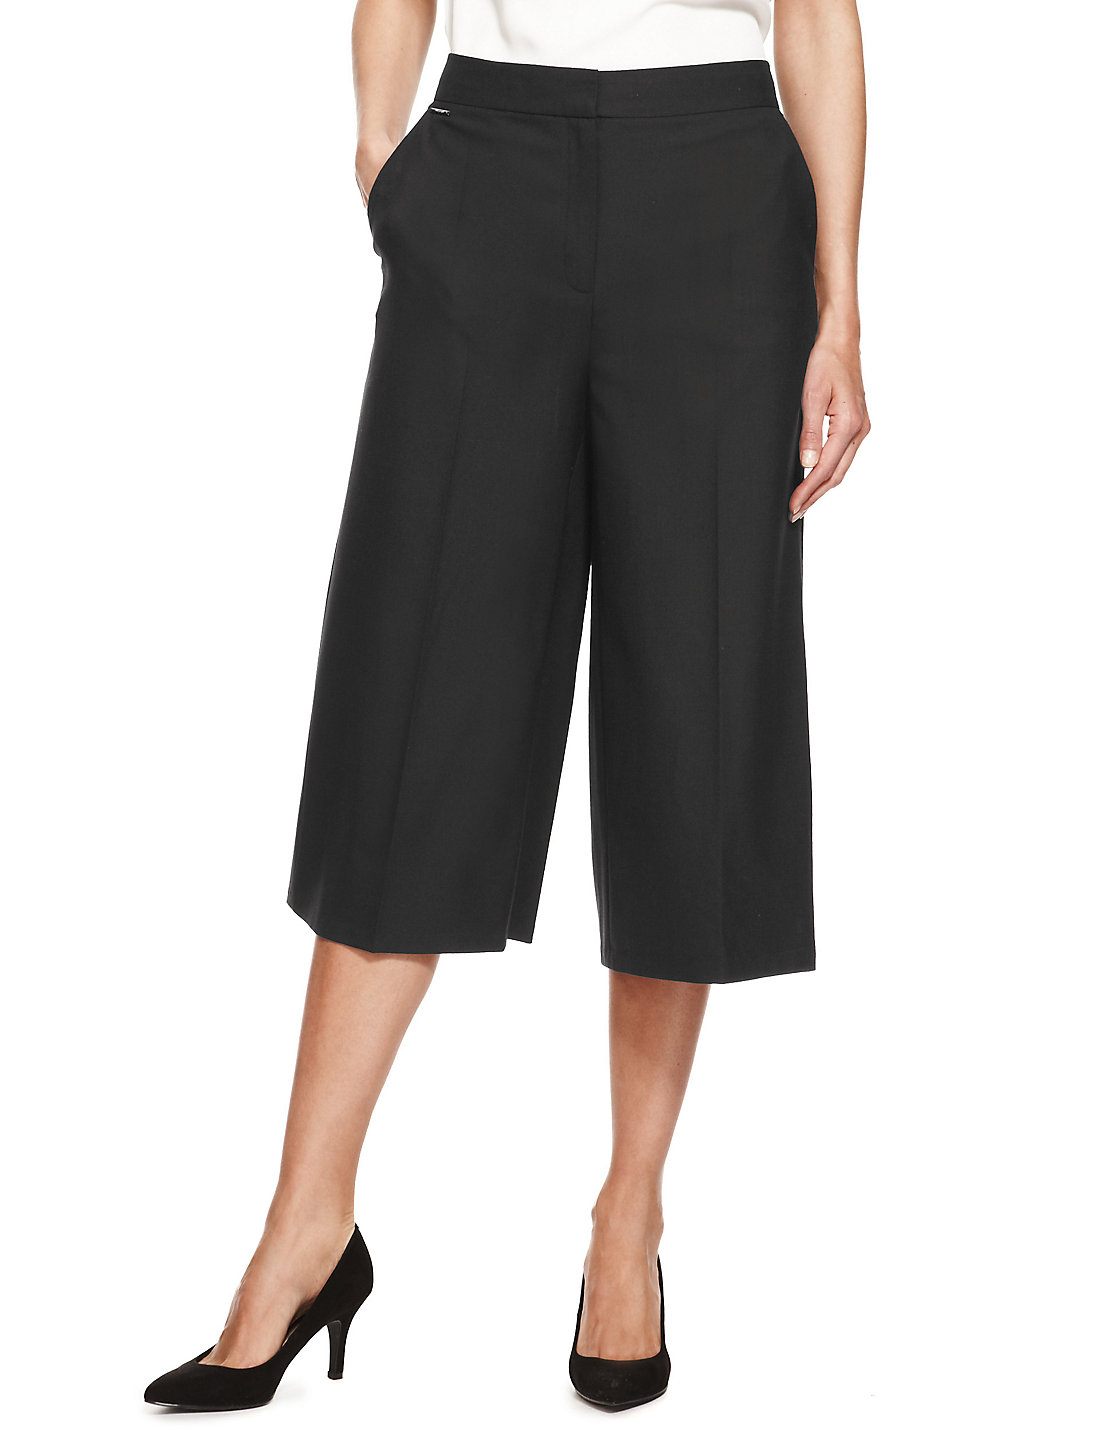 4utograph BLACK Wide Leg Cropped Culottes with Wool - Size 8 to 12